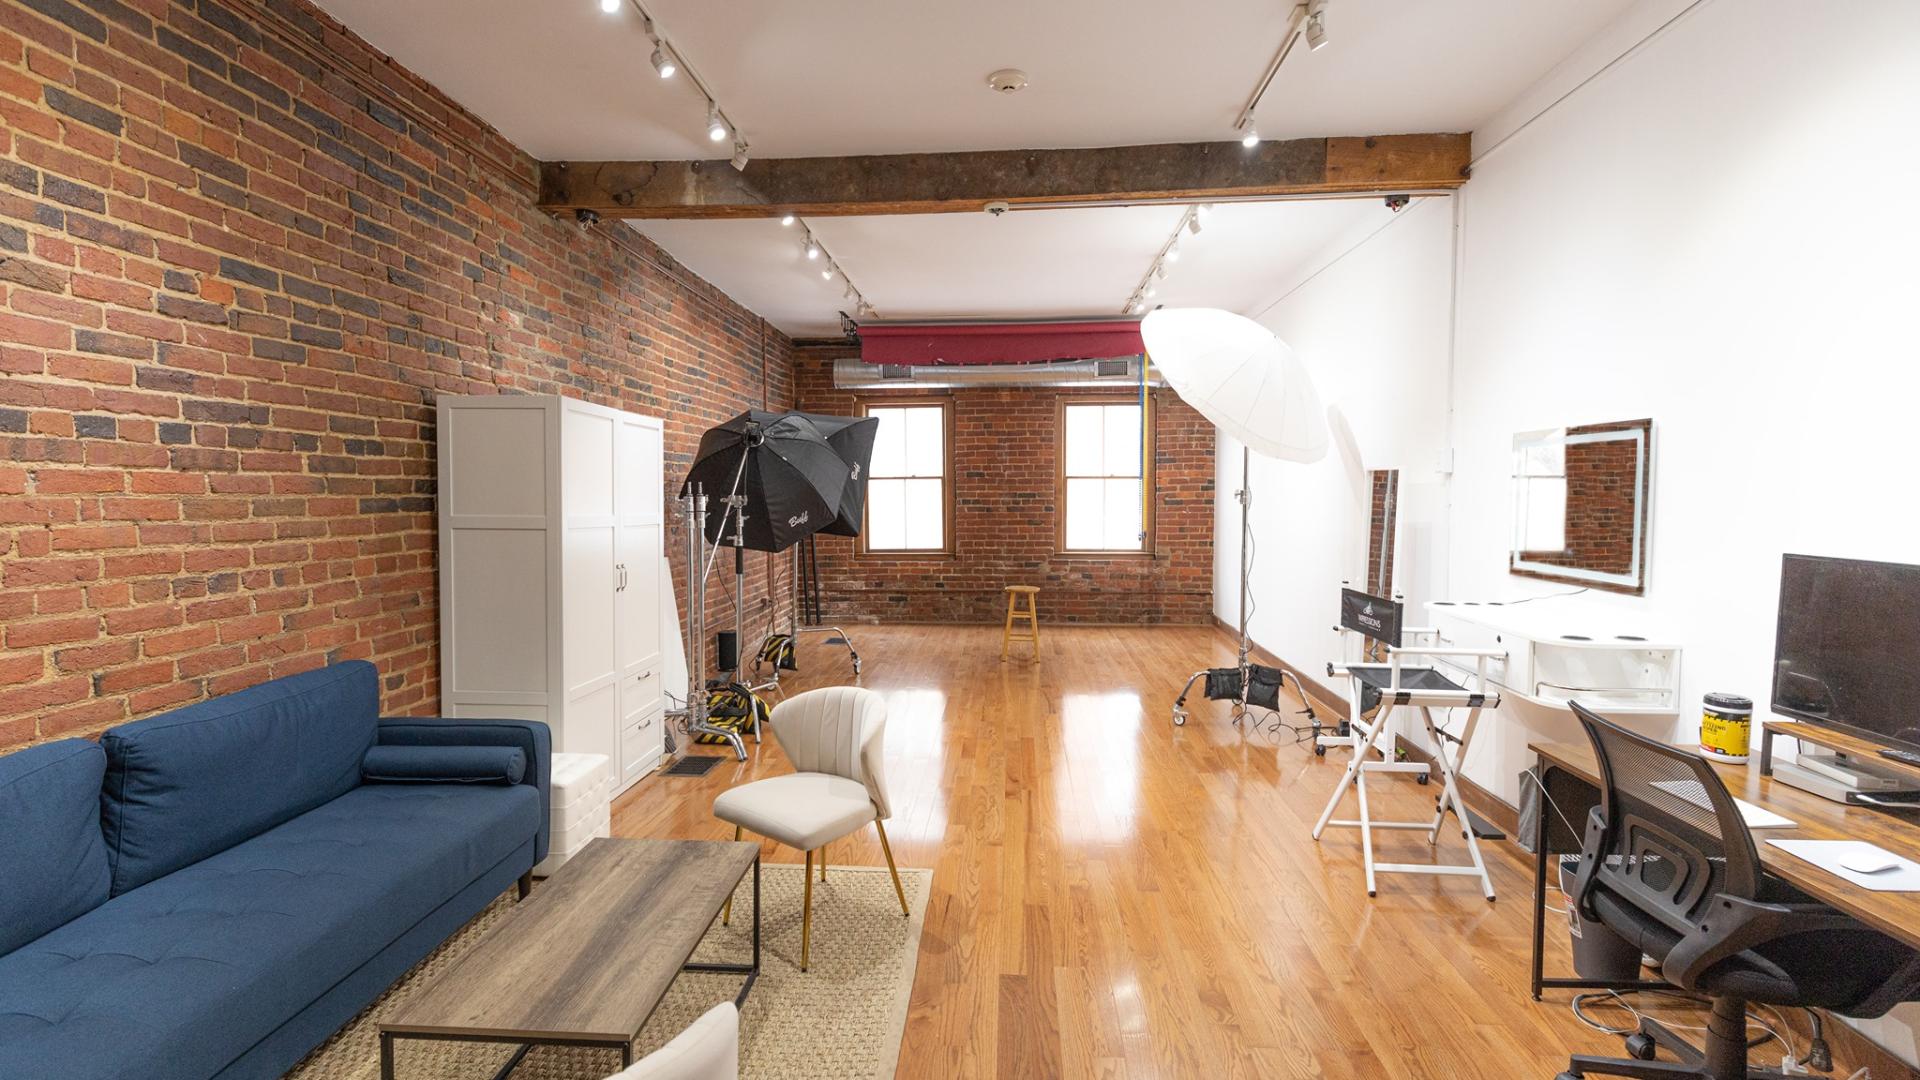 Photo Shoot Locations for Rent in Washington, DC